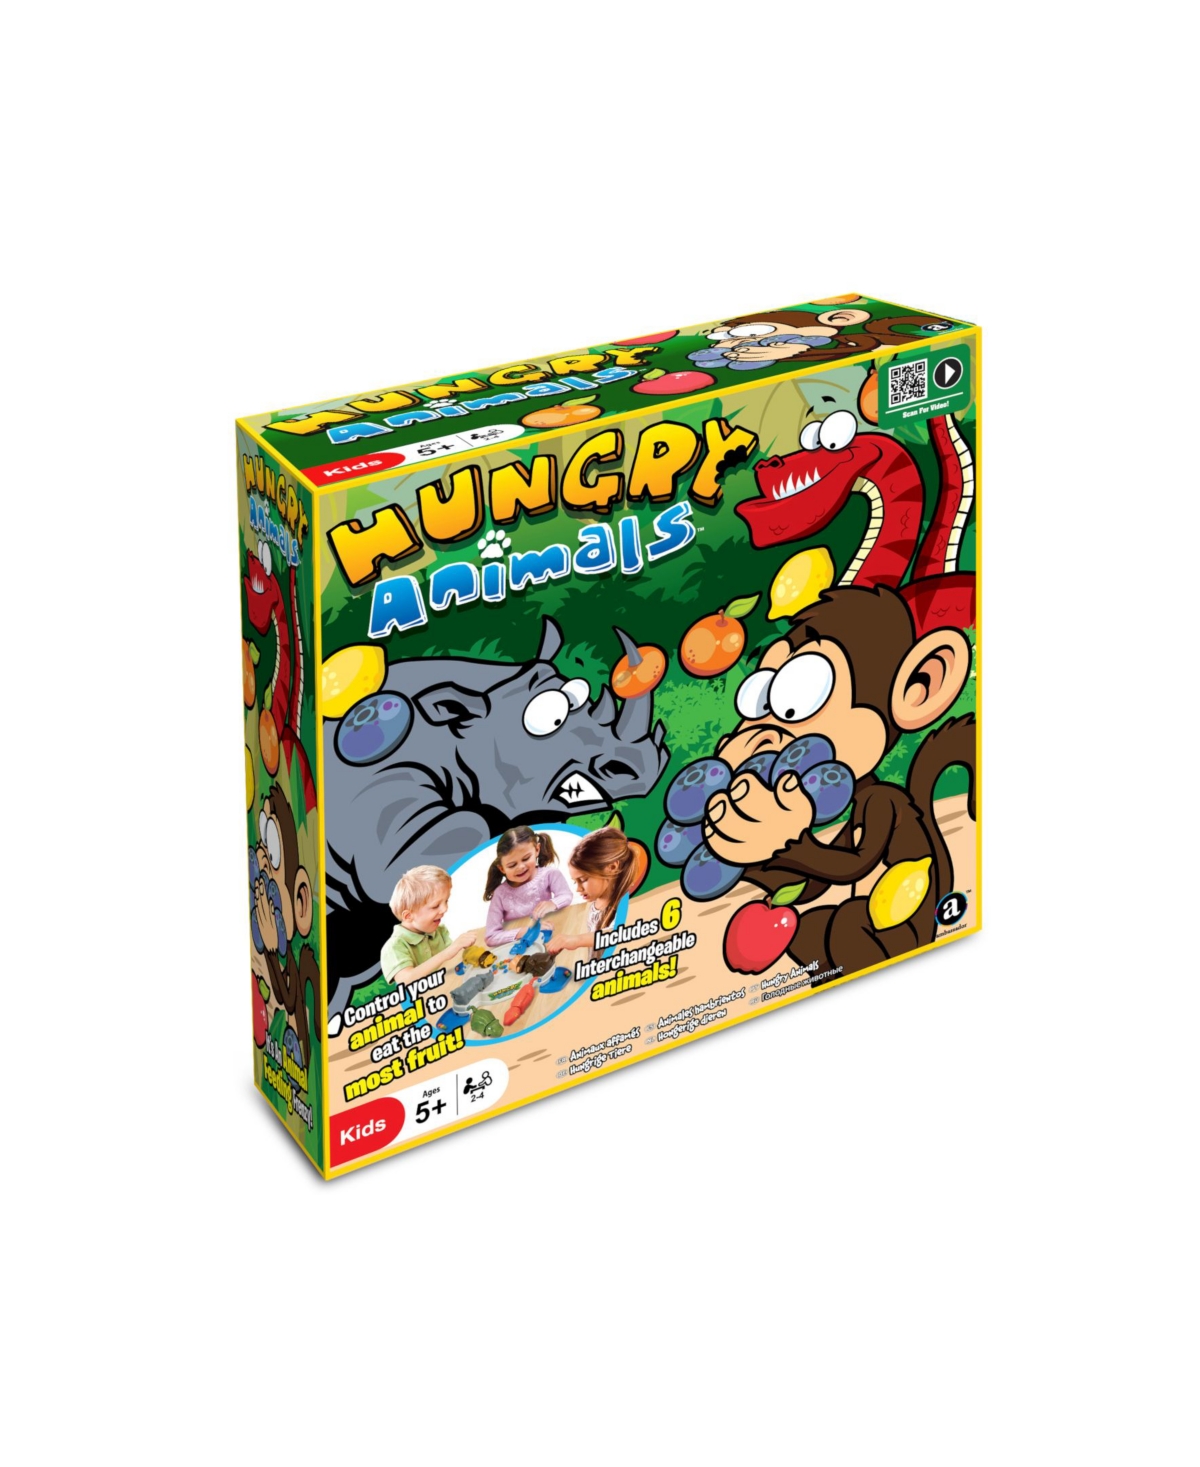 Shop Masterpieces Puzzles Merchant Ambassador Hungry Animals In Multi